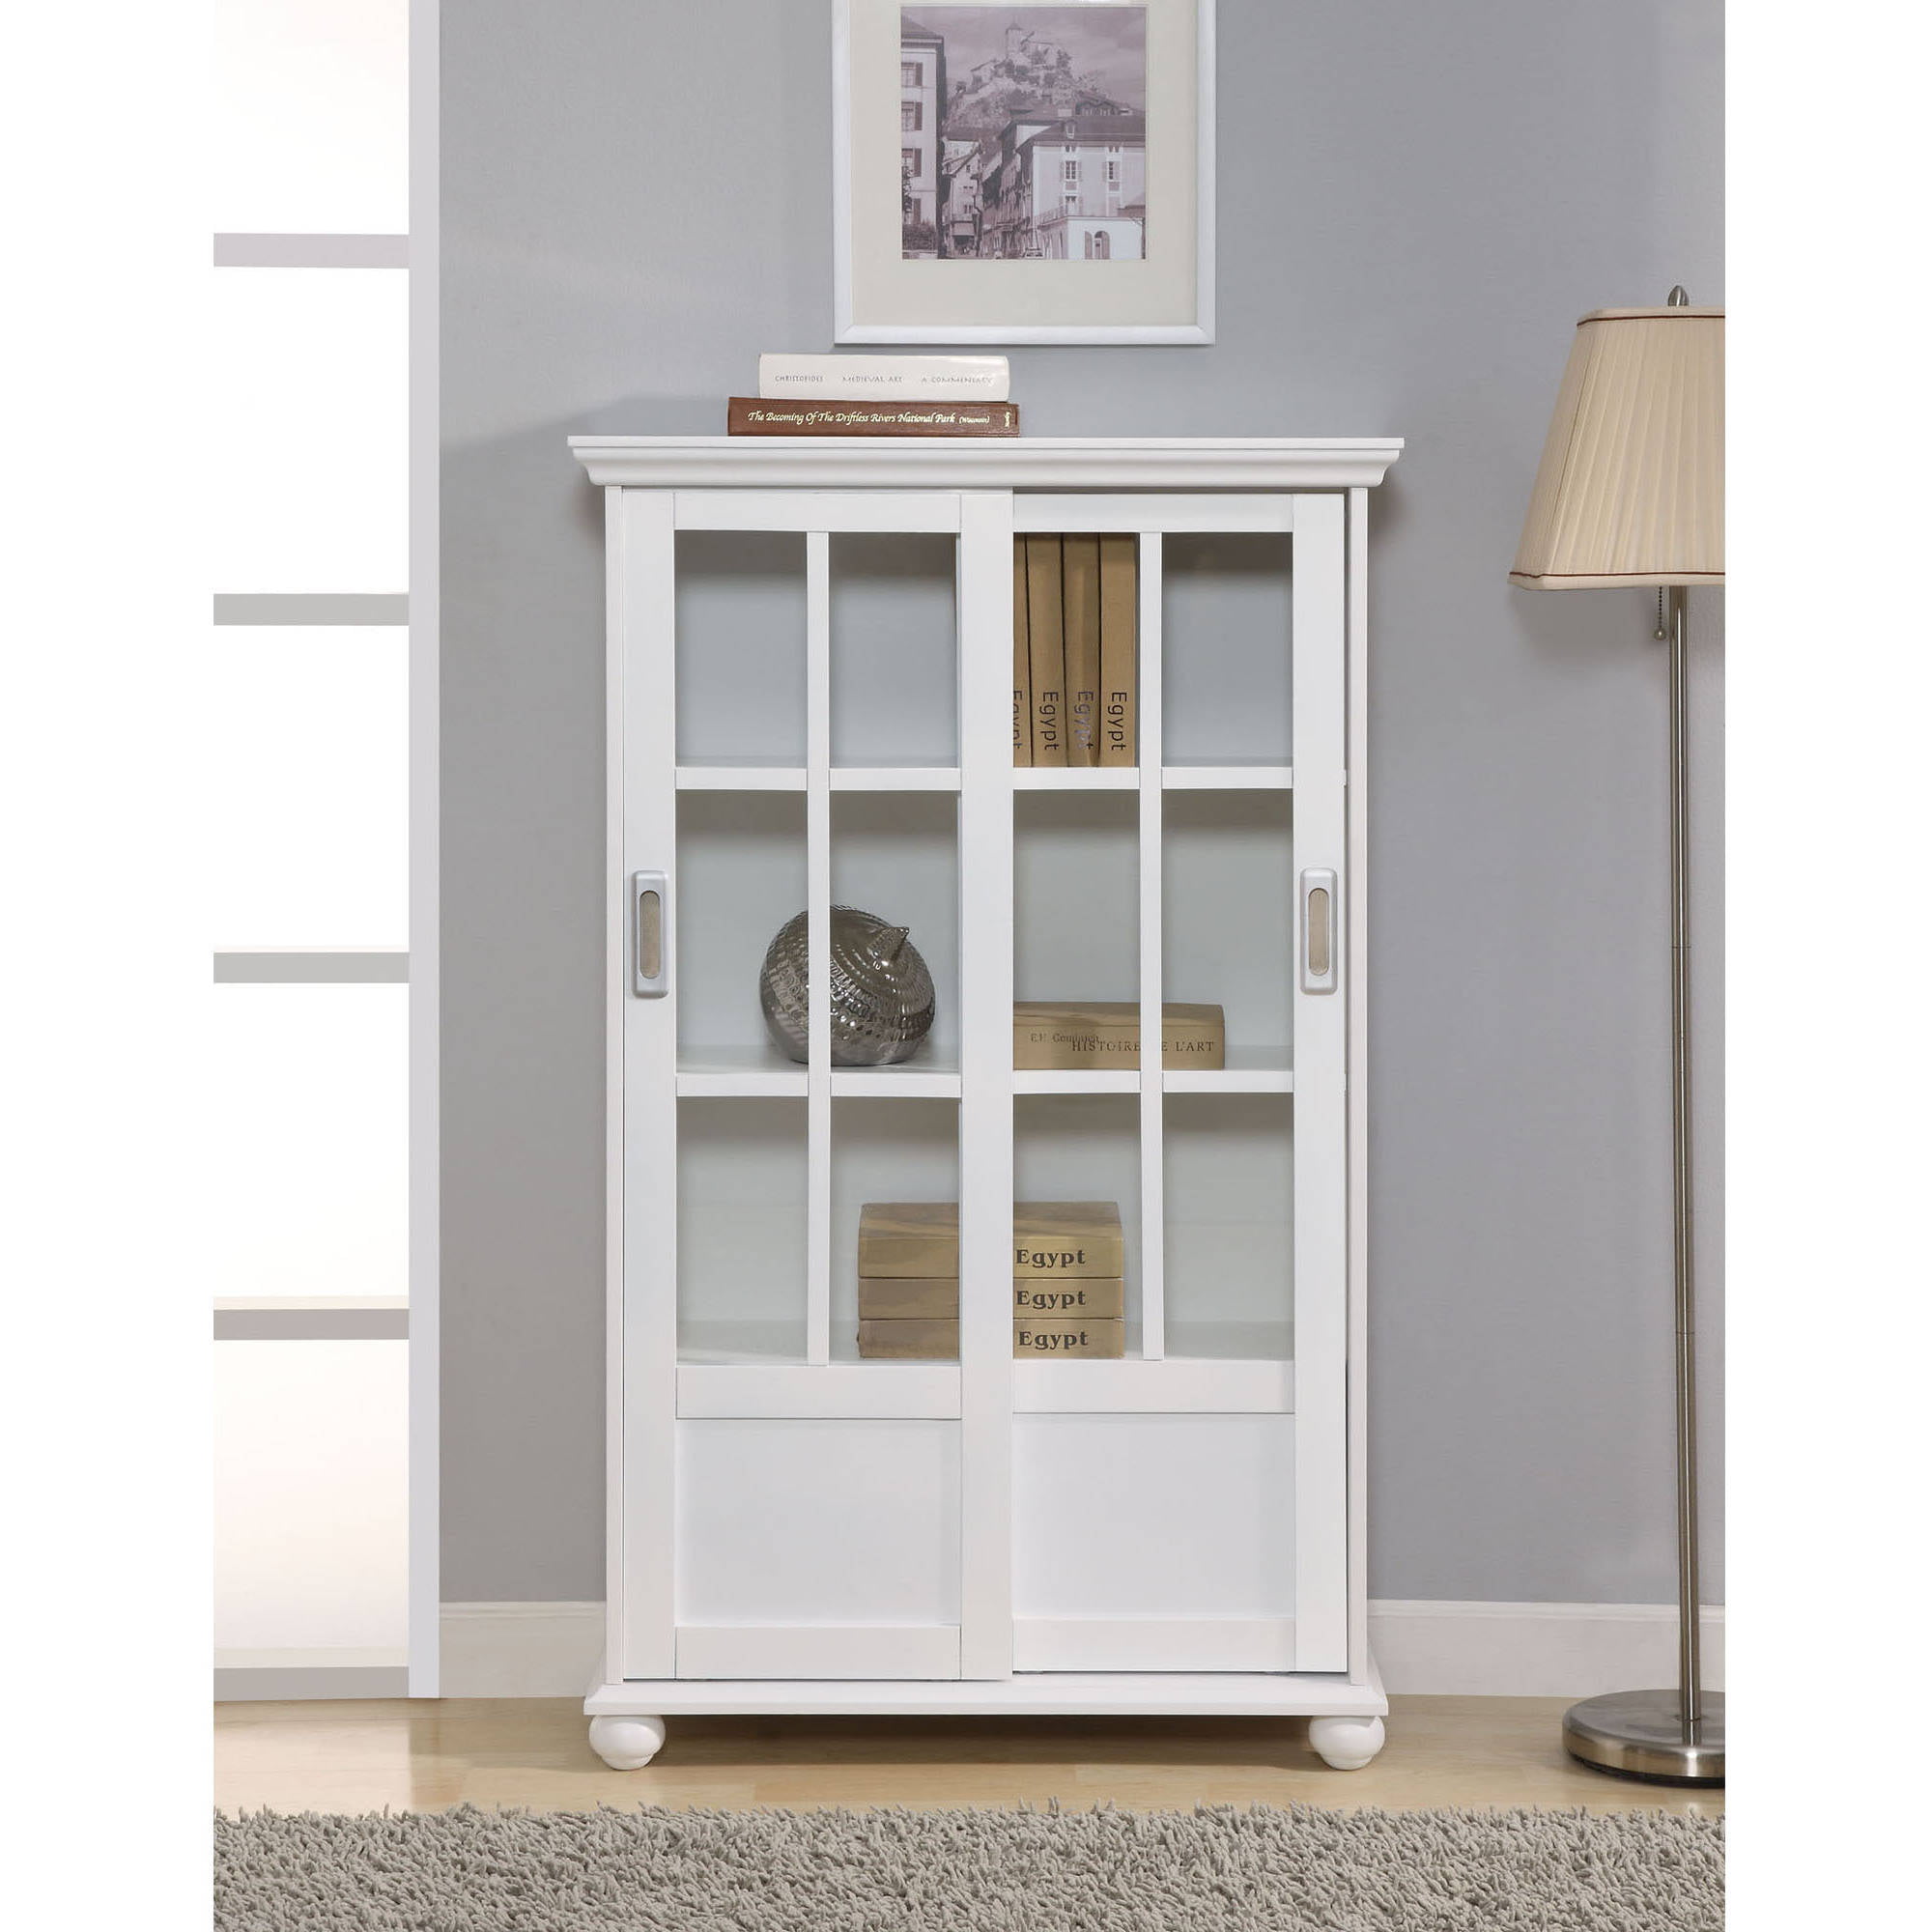 Ameriwood Home Aaron Lane Bookcase With, Oxford Bookcase With Glass Doors